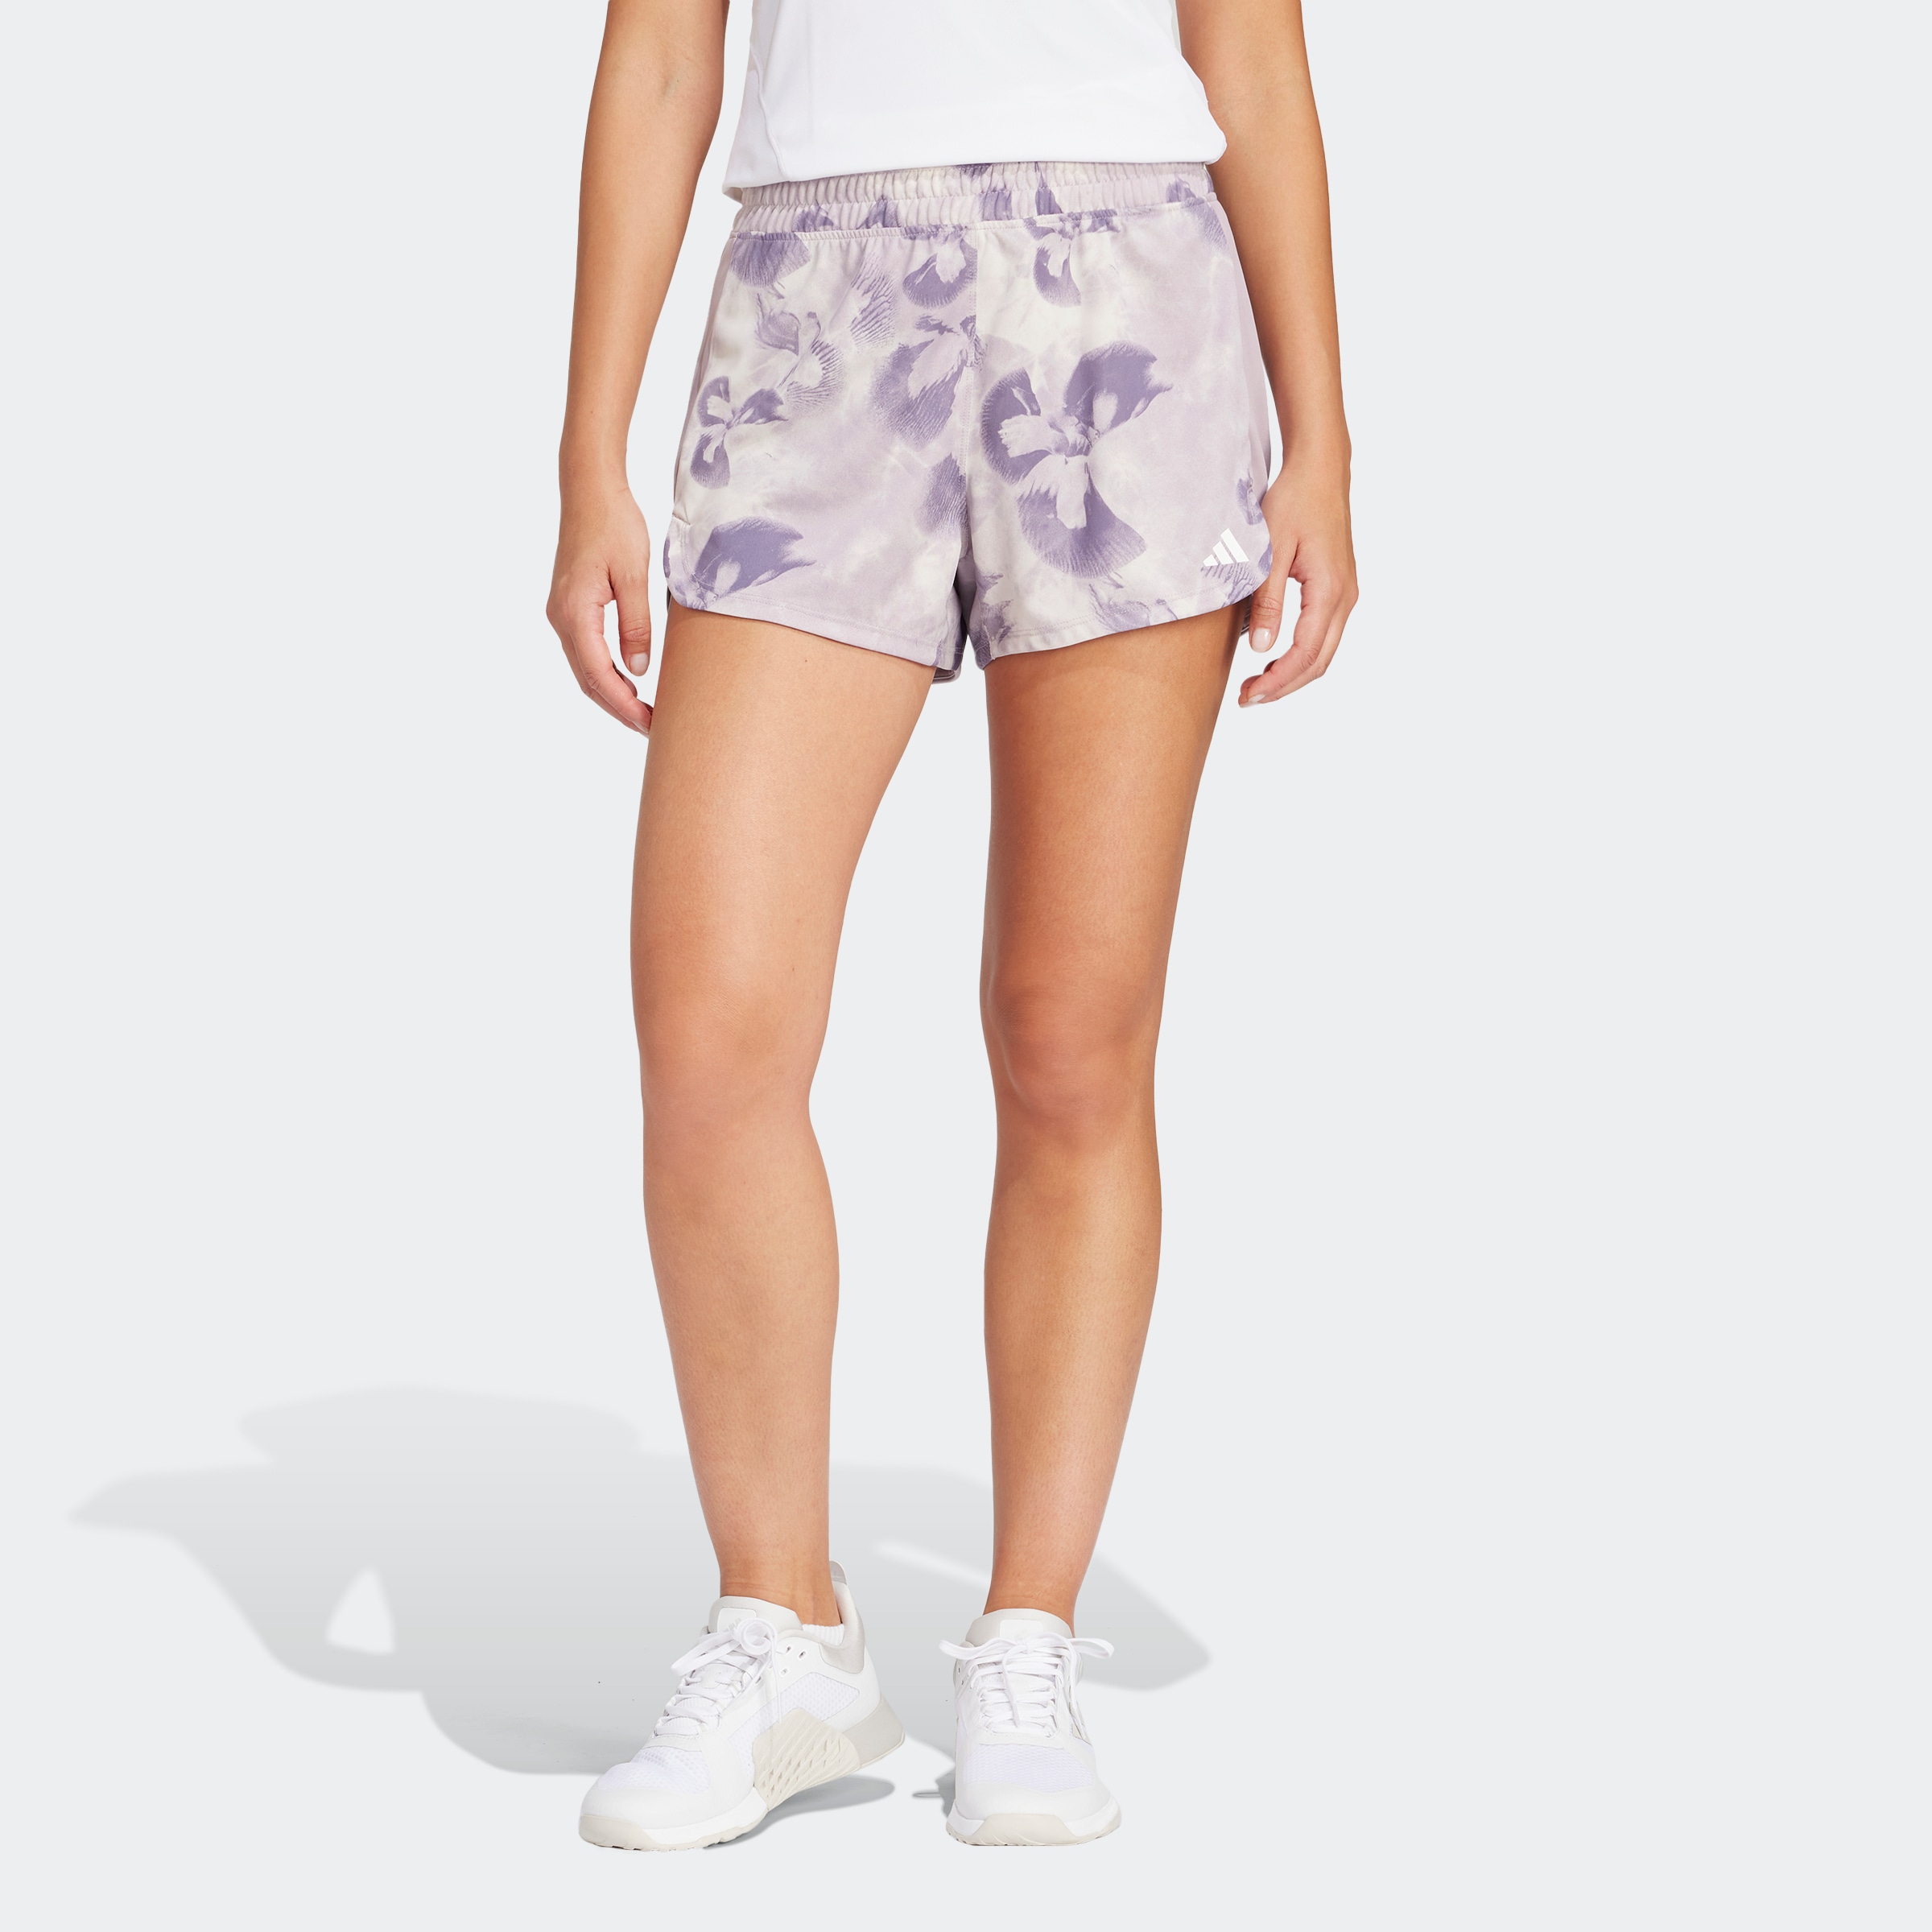 adidas Performance Shorts "PACER KN FLOWER", (1 tlg.)